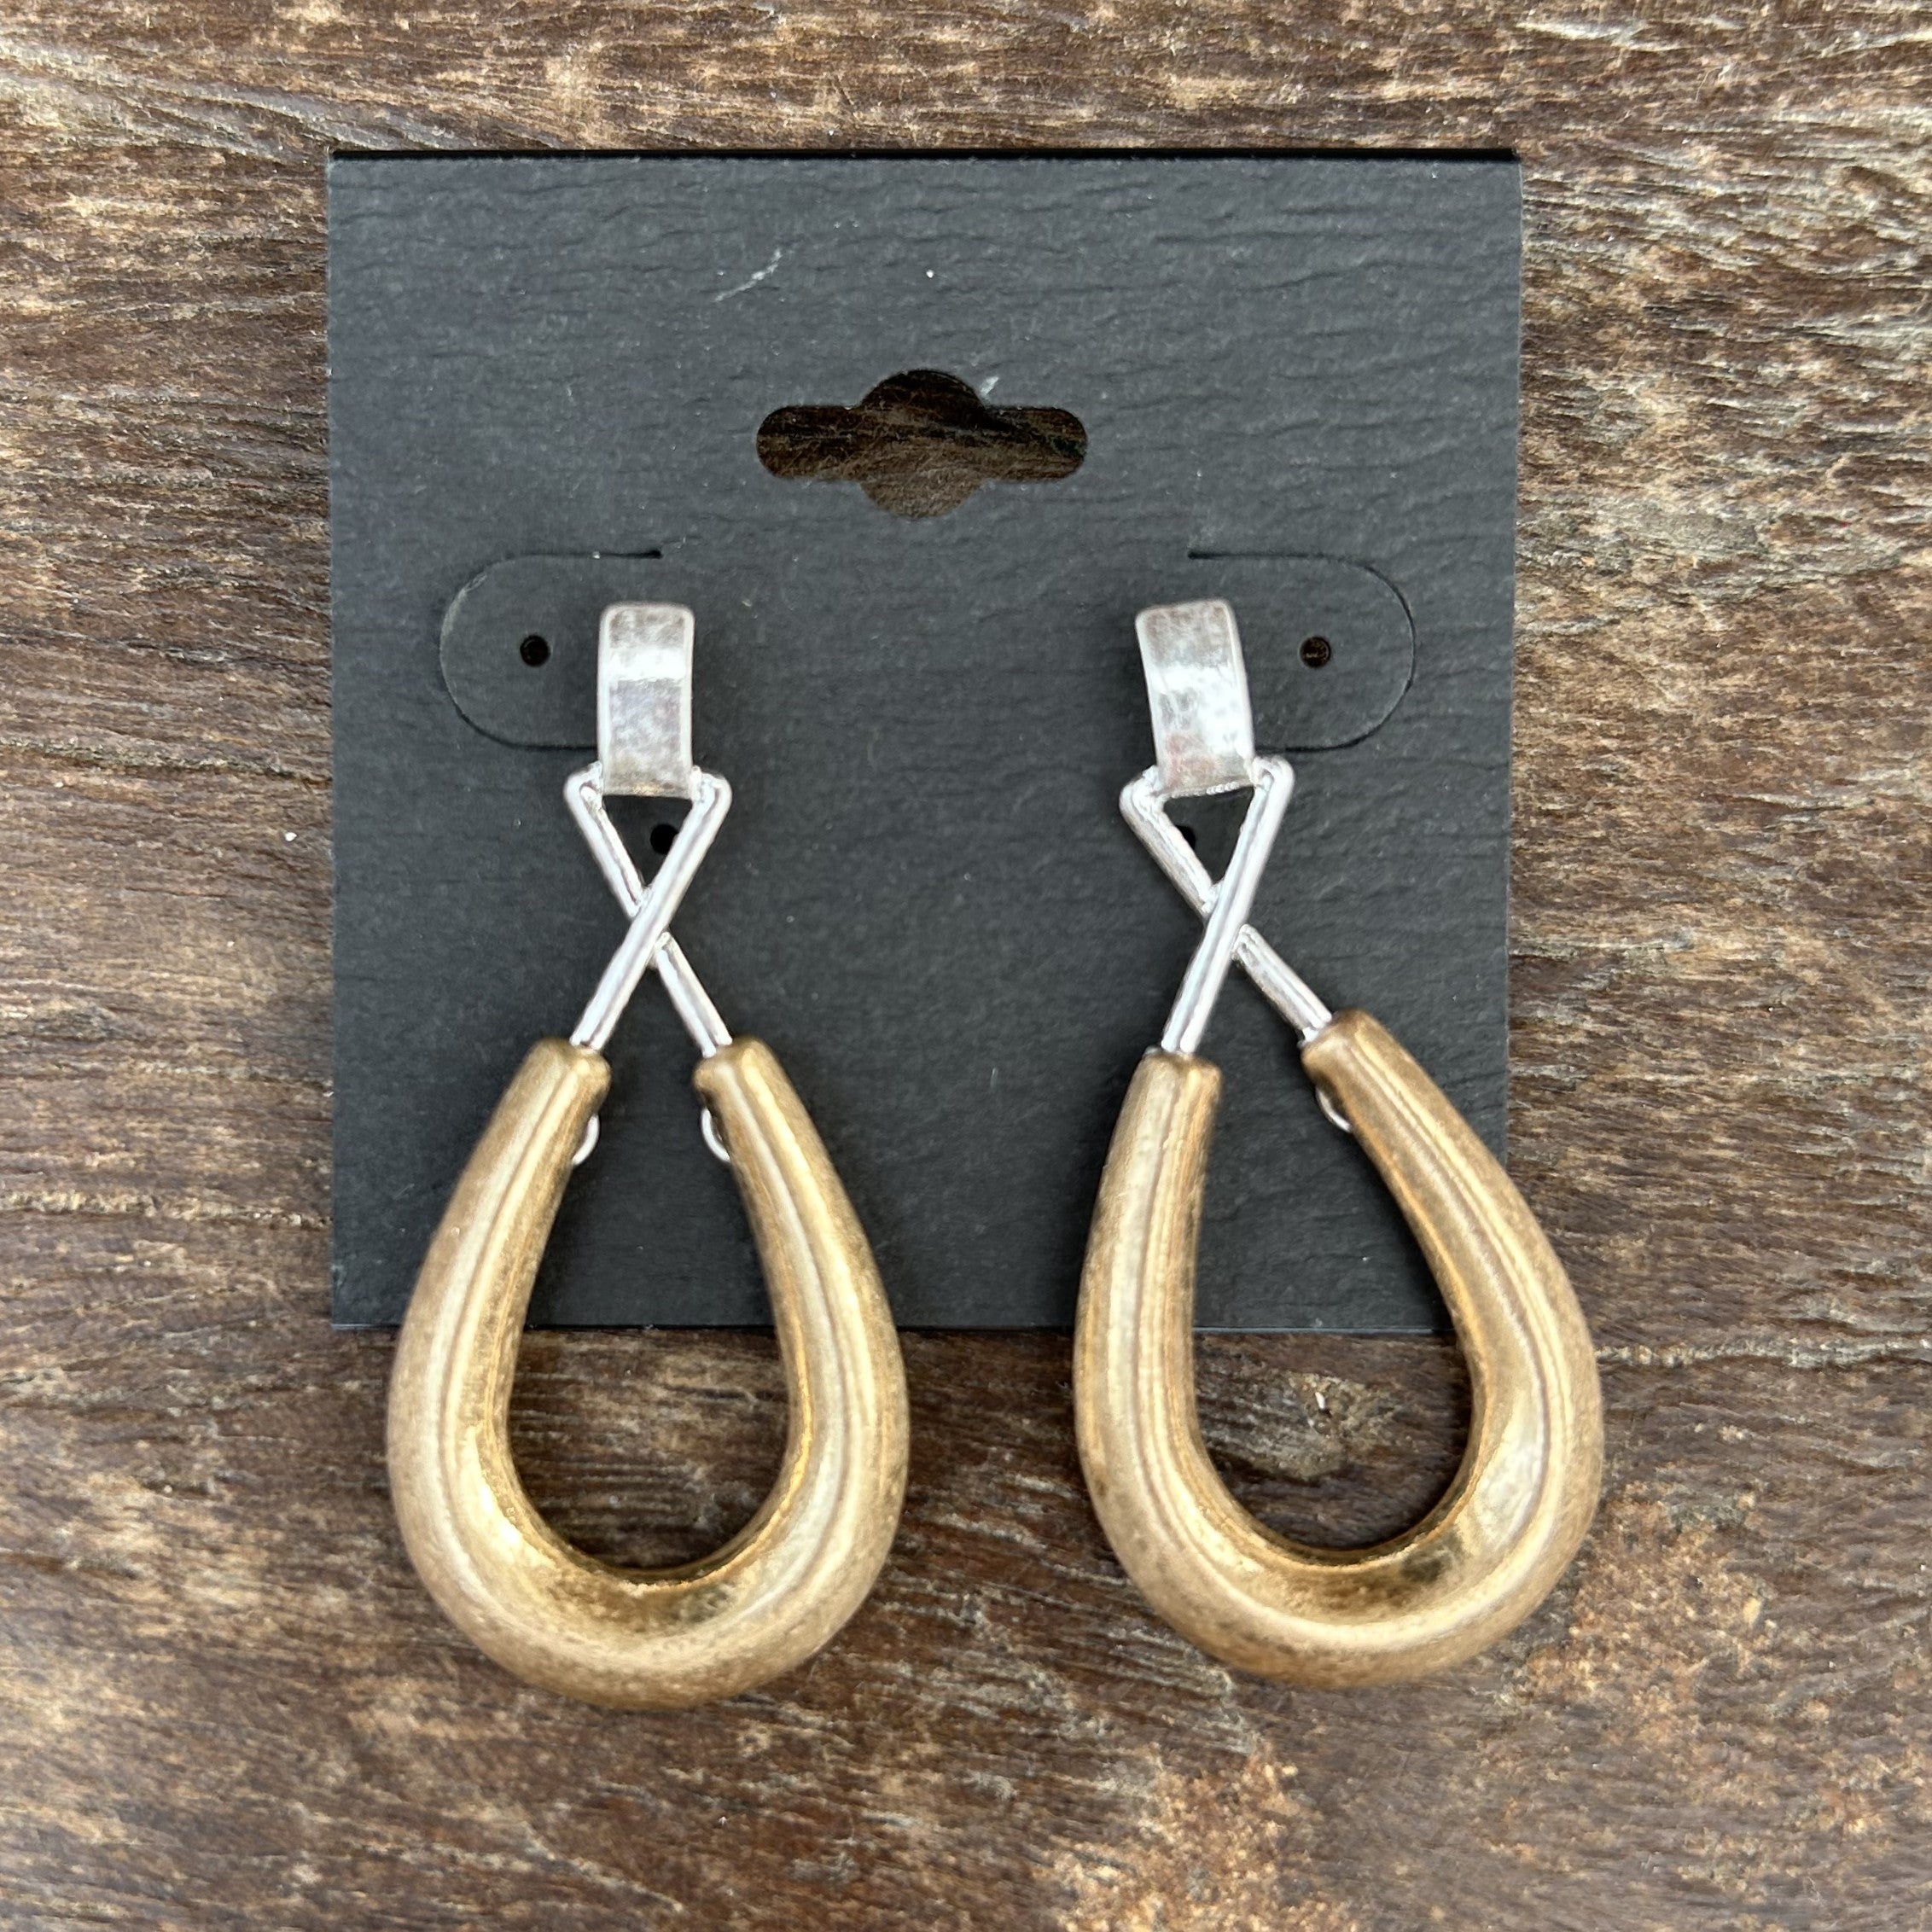 Discover elegance and style with these Two Tone Teardrop Earrings. Featuring a unique and modern design, these earrings are perfect for both formal and casual occasions. The secure post closure ensures comfortable wear all day long. Enhance any outfit with these elegant yet casual earrings.